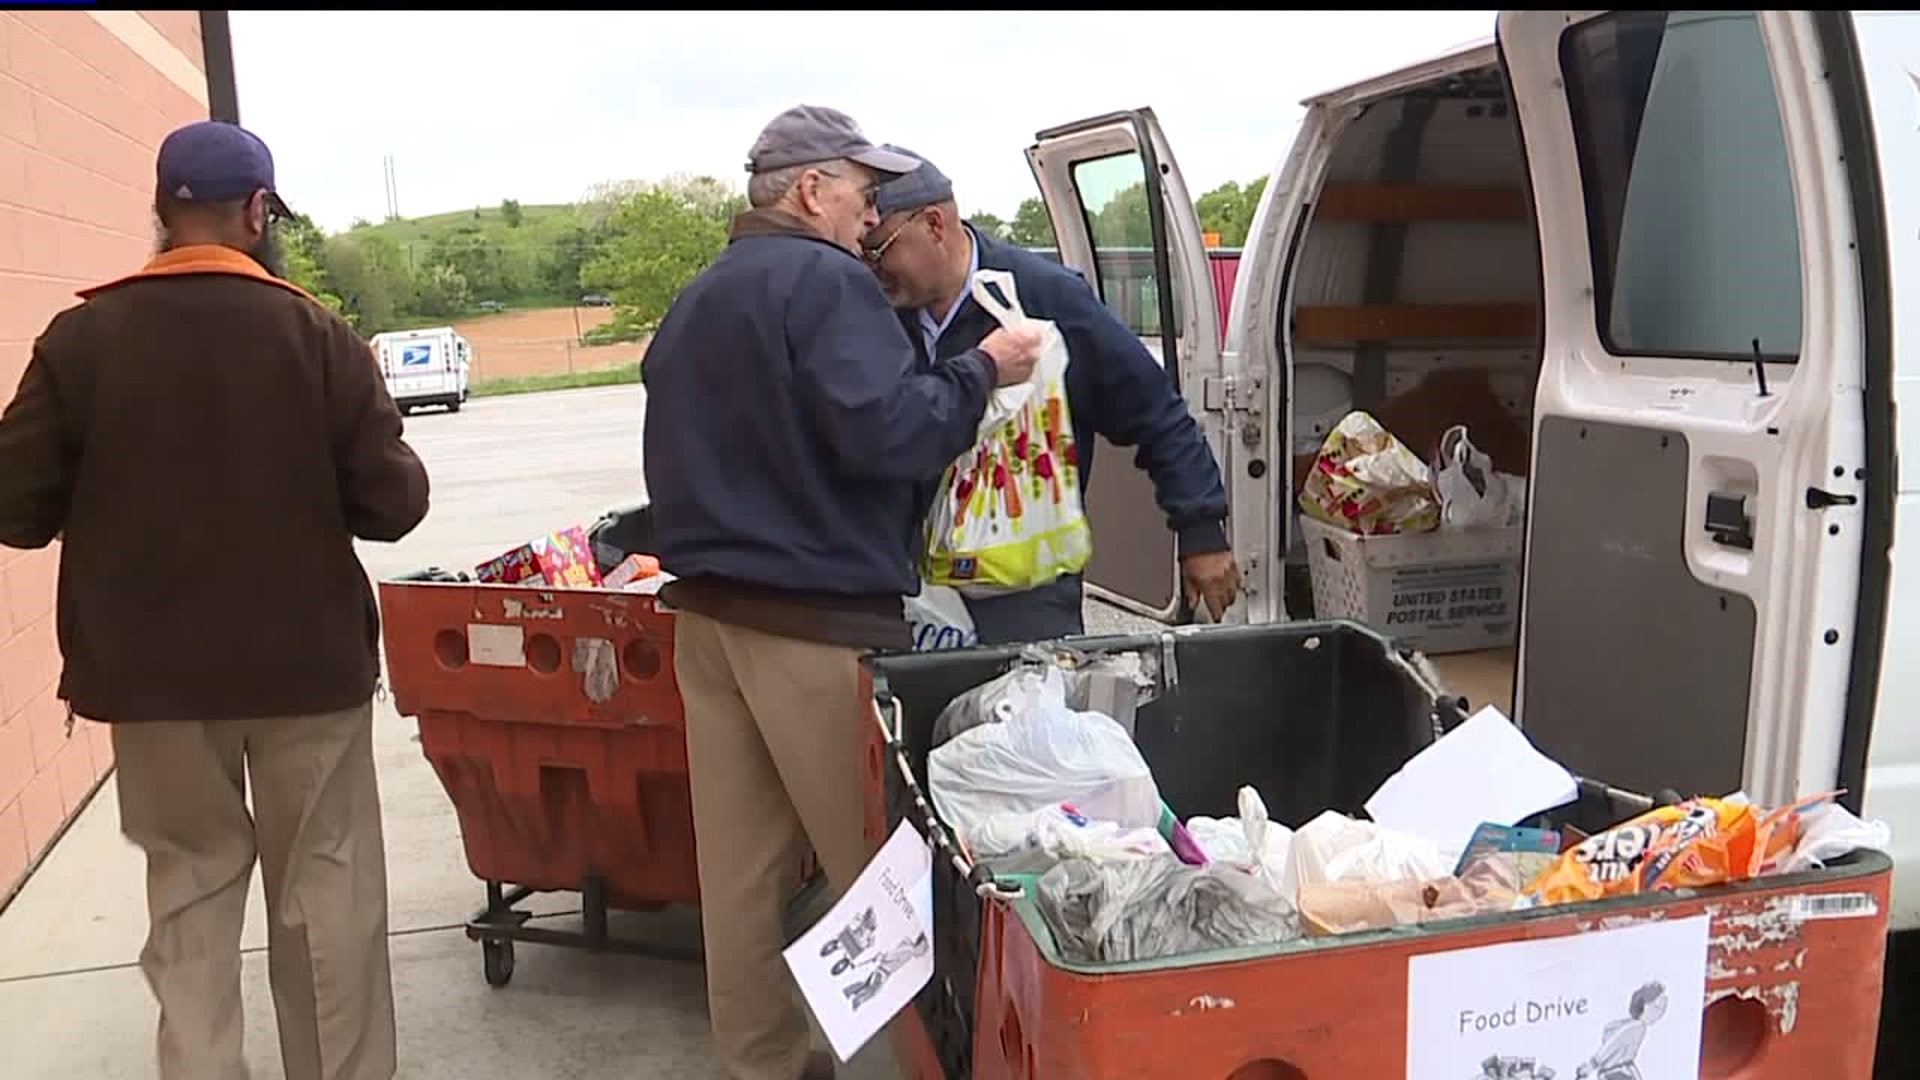 U.S. Postal Service collects food to help "Stamp Out" hunger